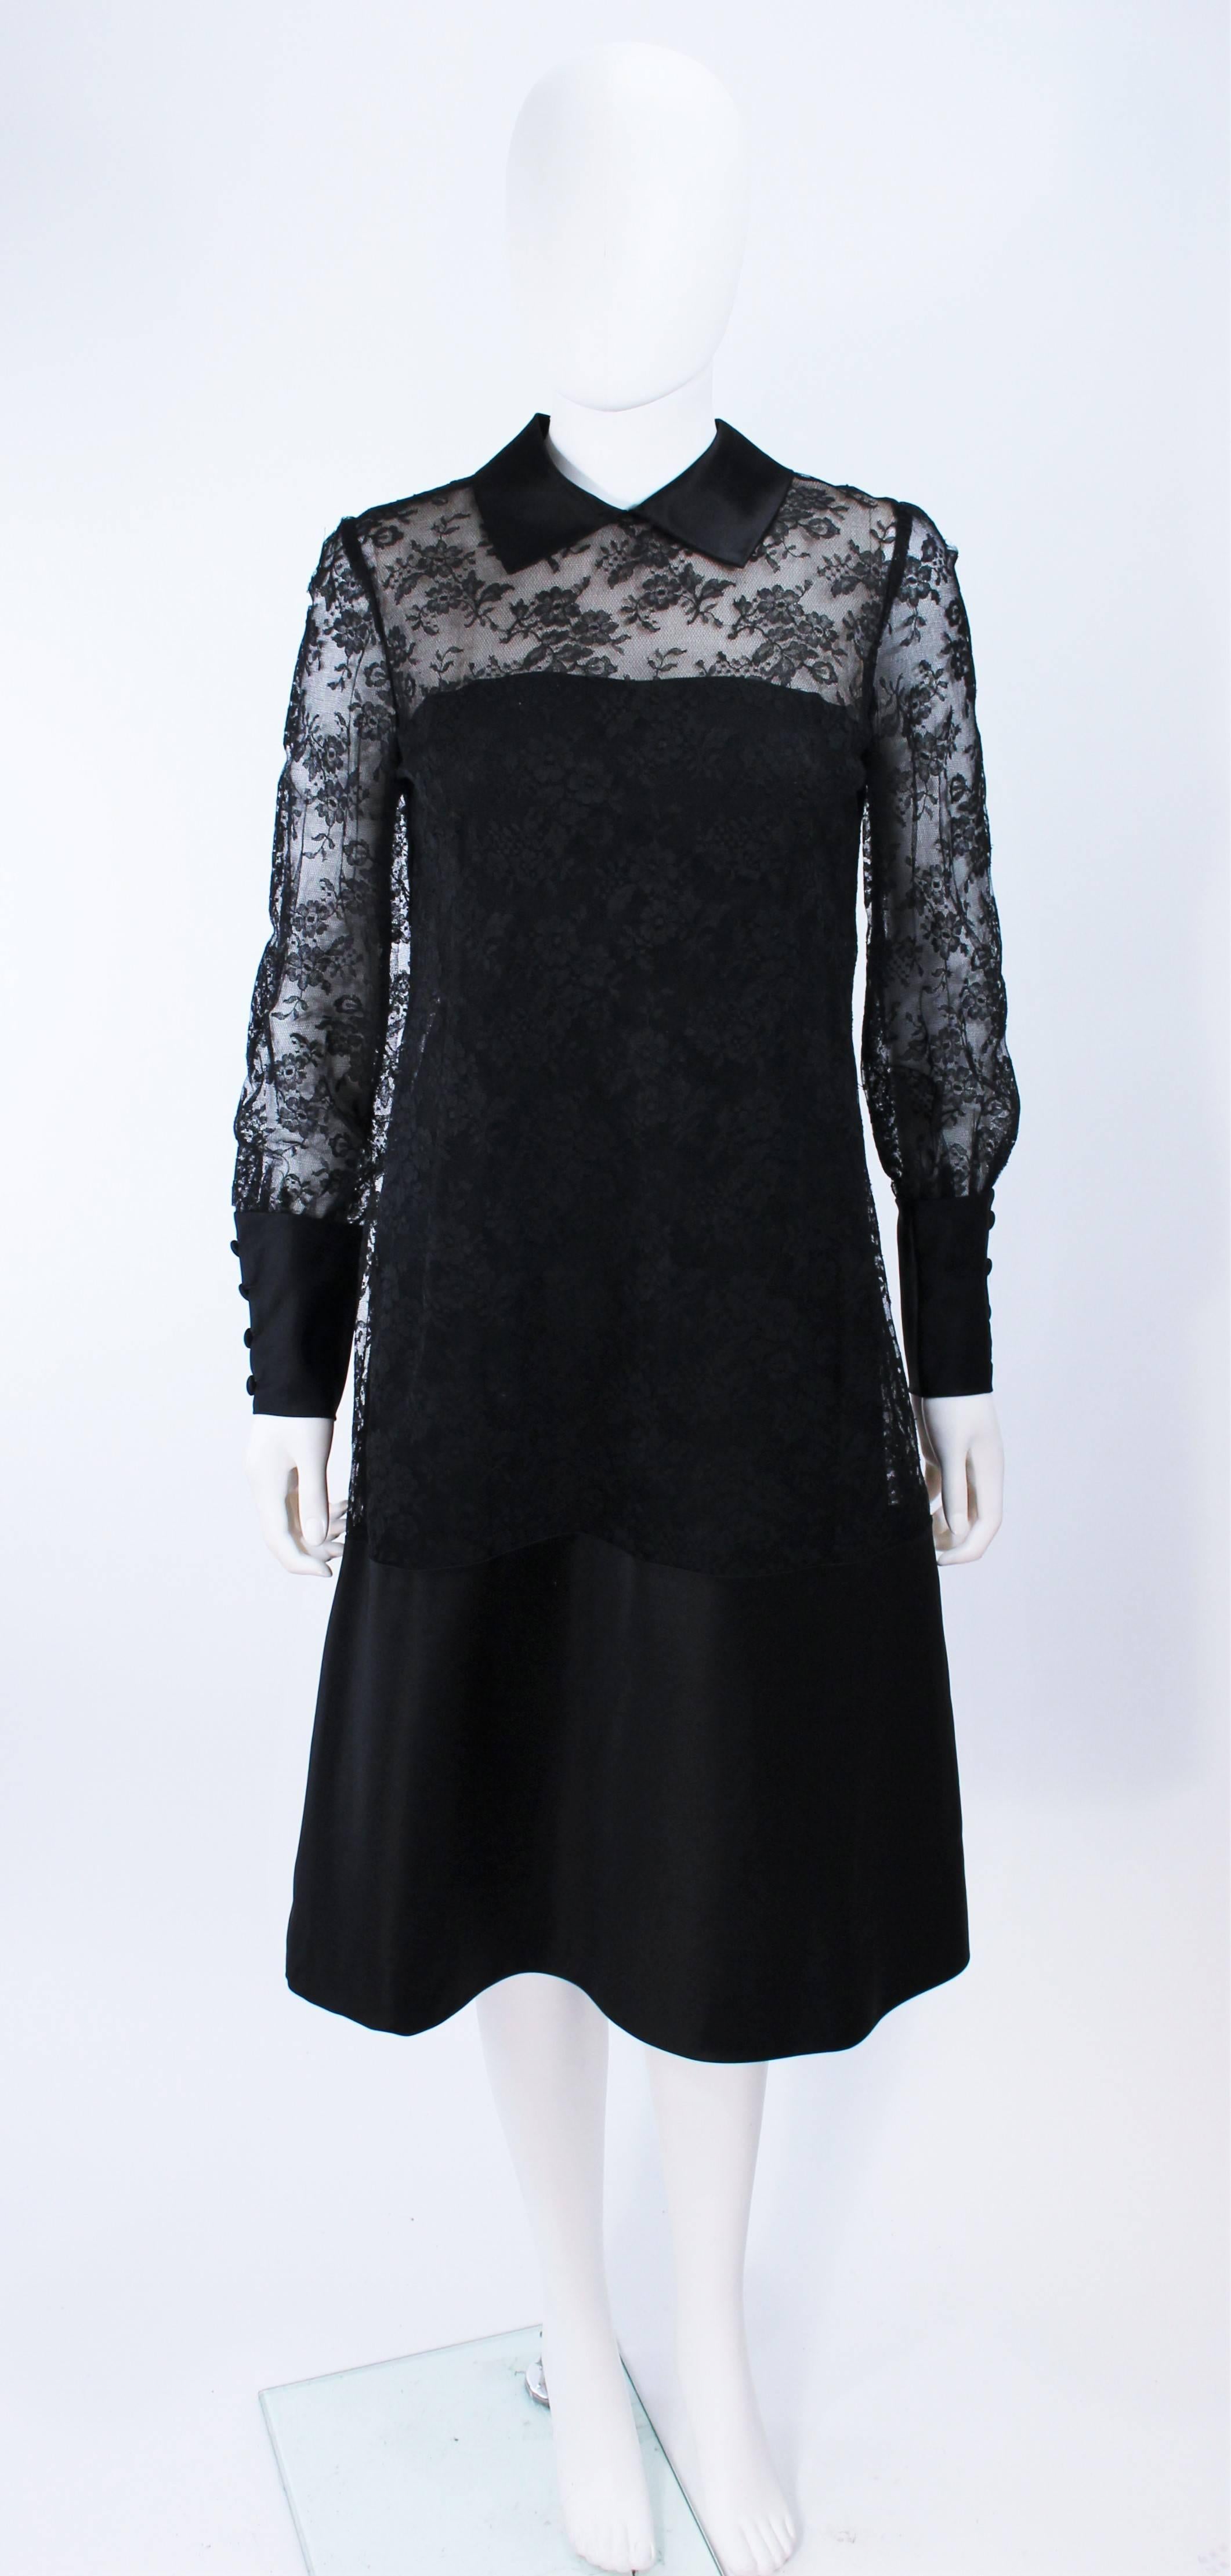 This Malcolm Starr design is composed of a black lace with silk accenting. Features a center back zipper closure with buttons. In excellent vintage condition.

**Please cross-reference measurements for personal accuracy. Size in description box is